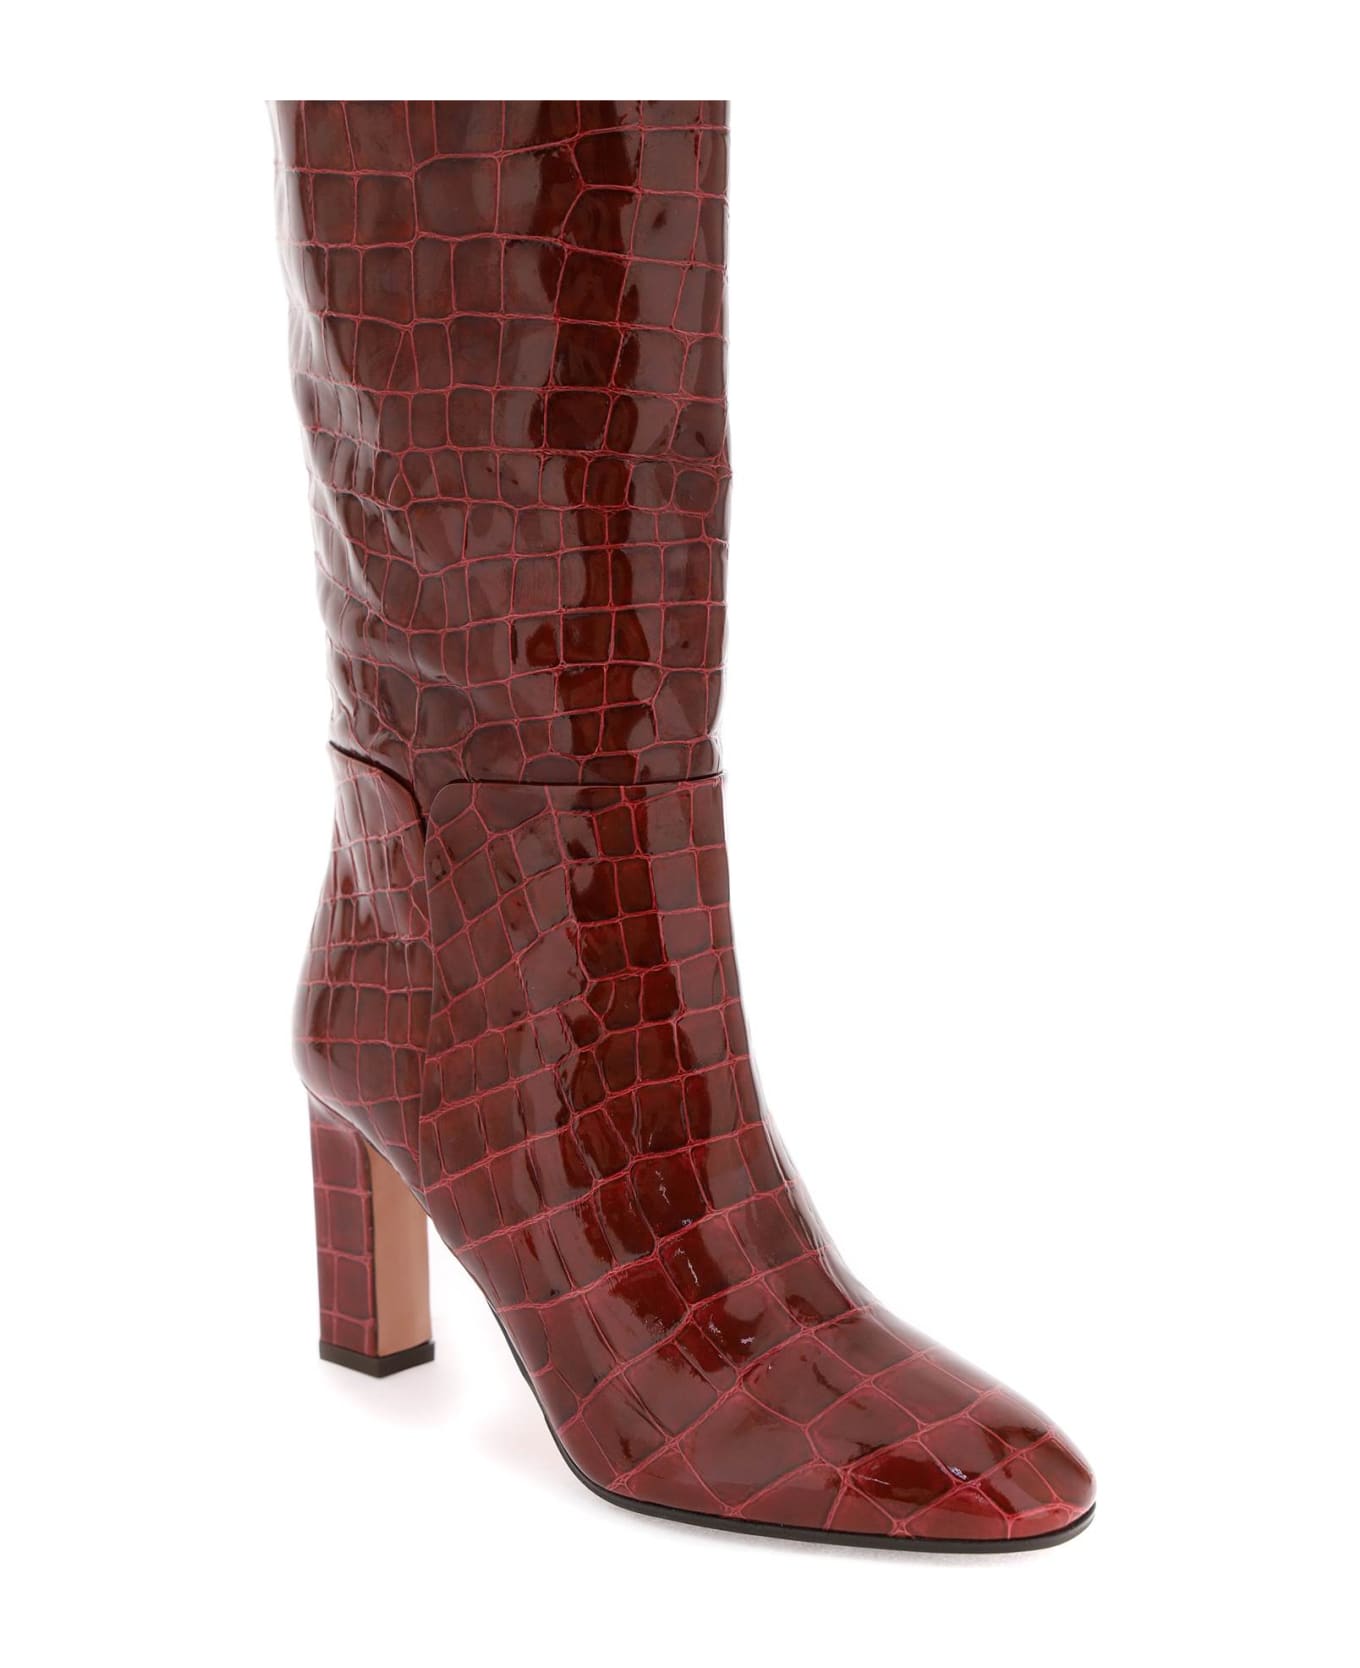 Aquazzura Sellier Boots In Croc-embossed Leather - DARK AUBERGEUR (Red) ブーツ